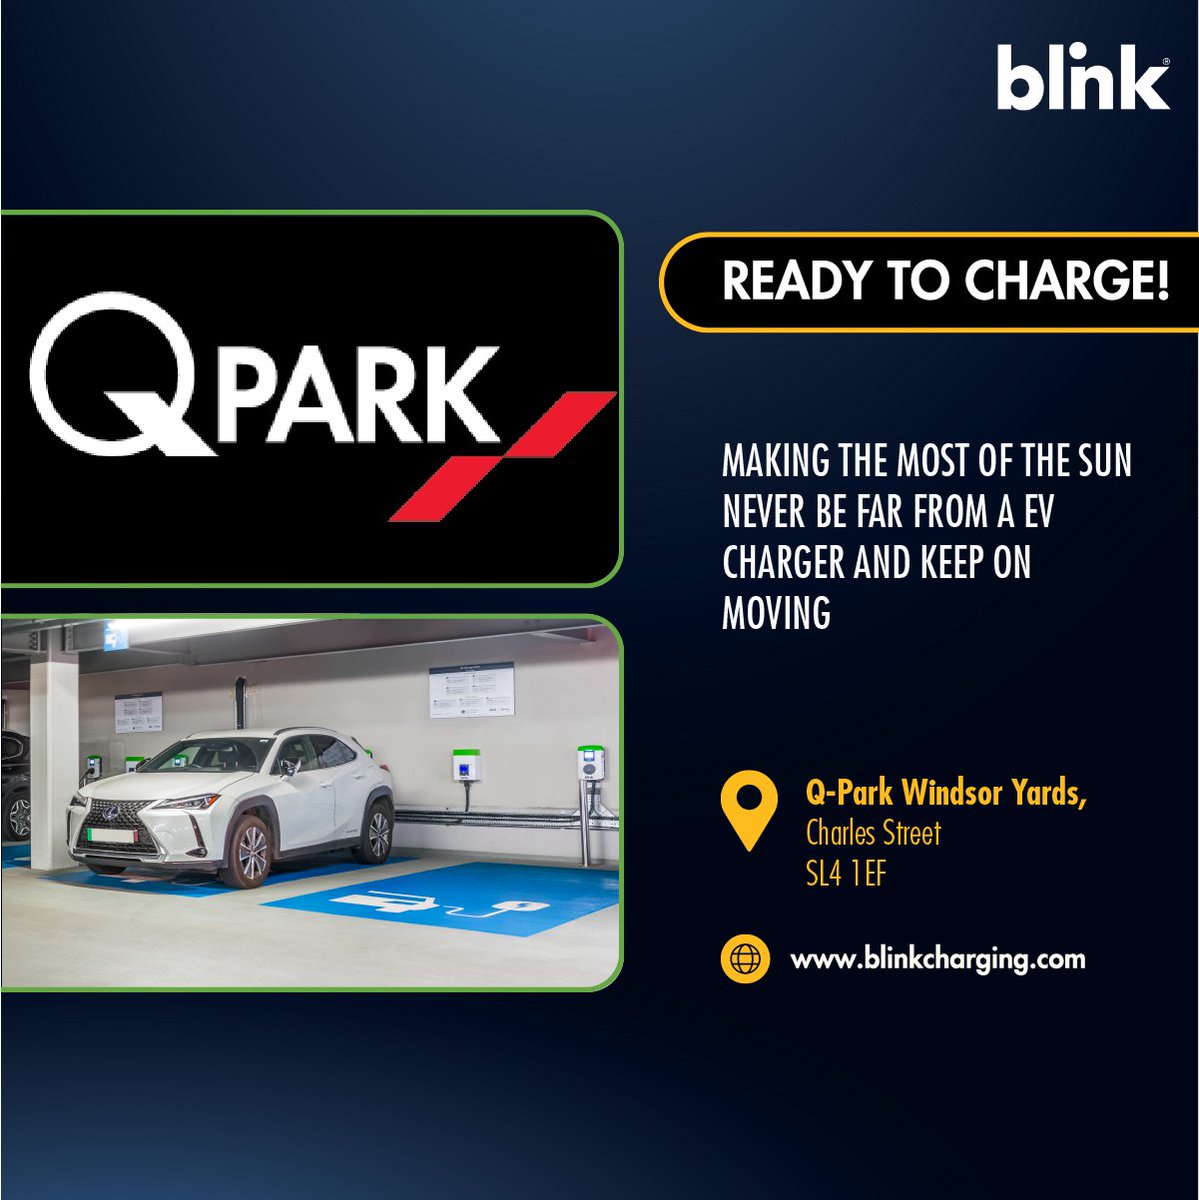 Out on the move this weekend, don't worry about being far from a top-up charger, download the Blink Charging App and find many locations around the UK like @Q-Park Windsor Yards and become range confident. #KeepMoving #OnTheGoCharging #Chargingdestinations